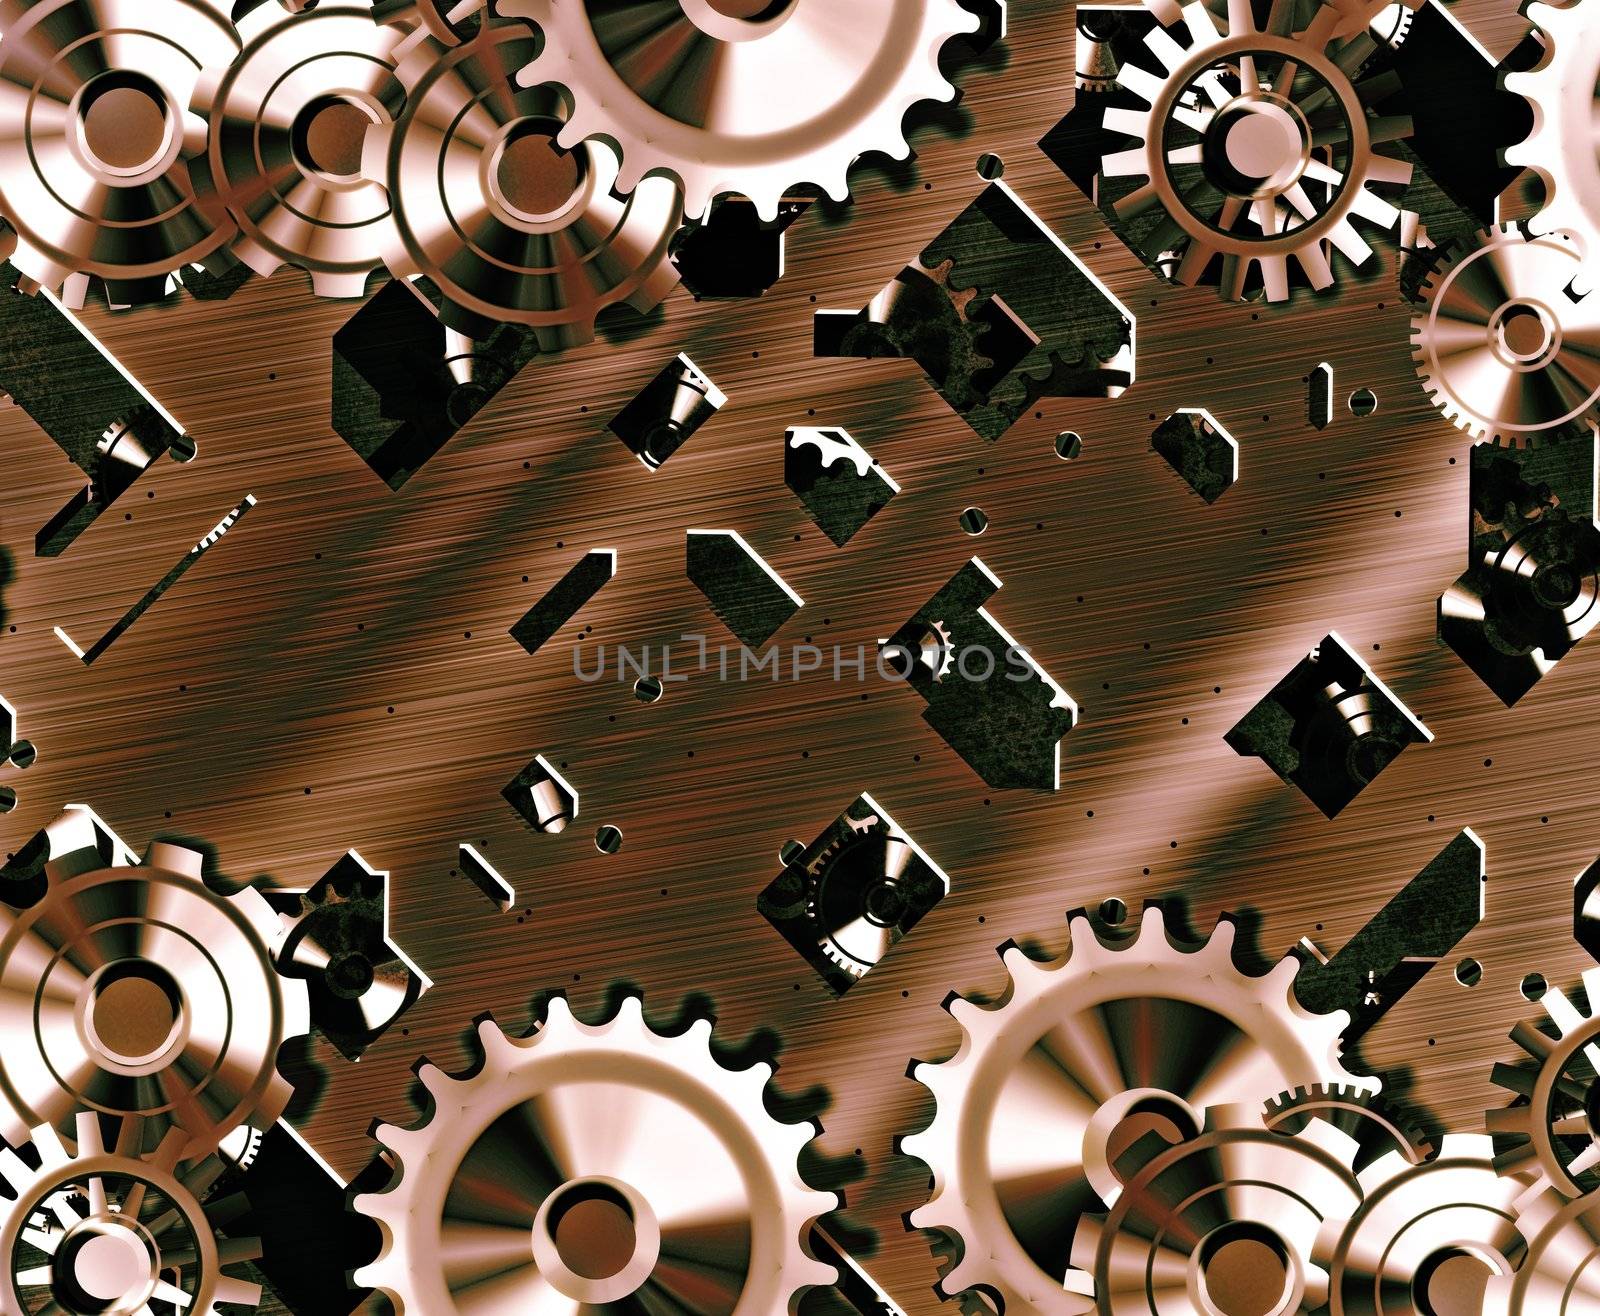 illustration of steampunk inspired cogs and clockwork